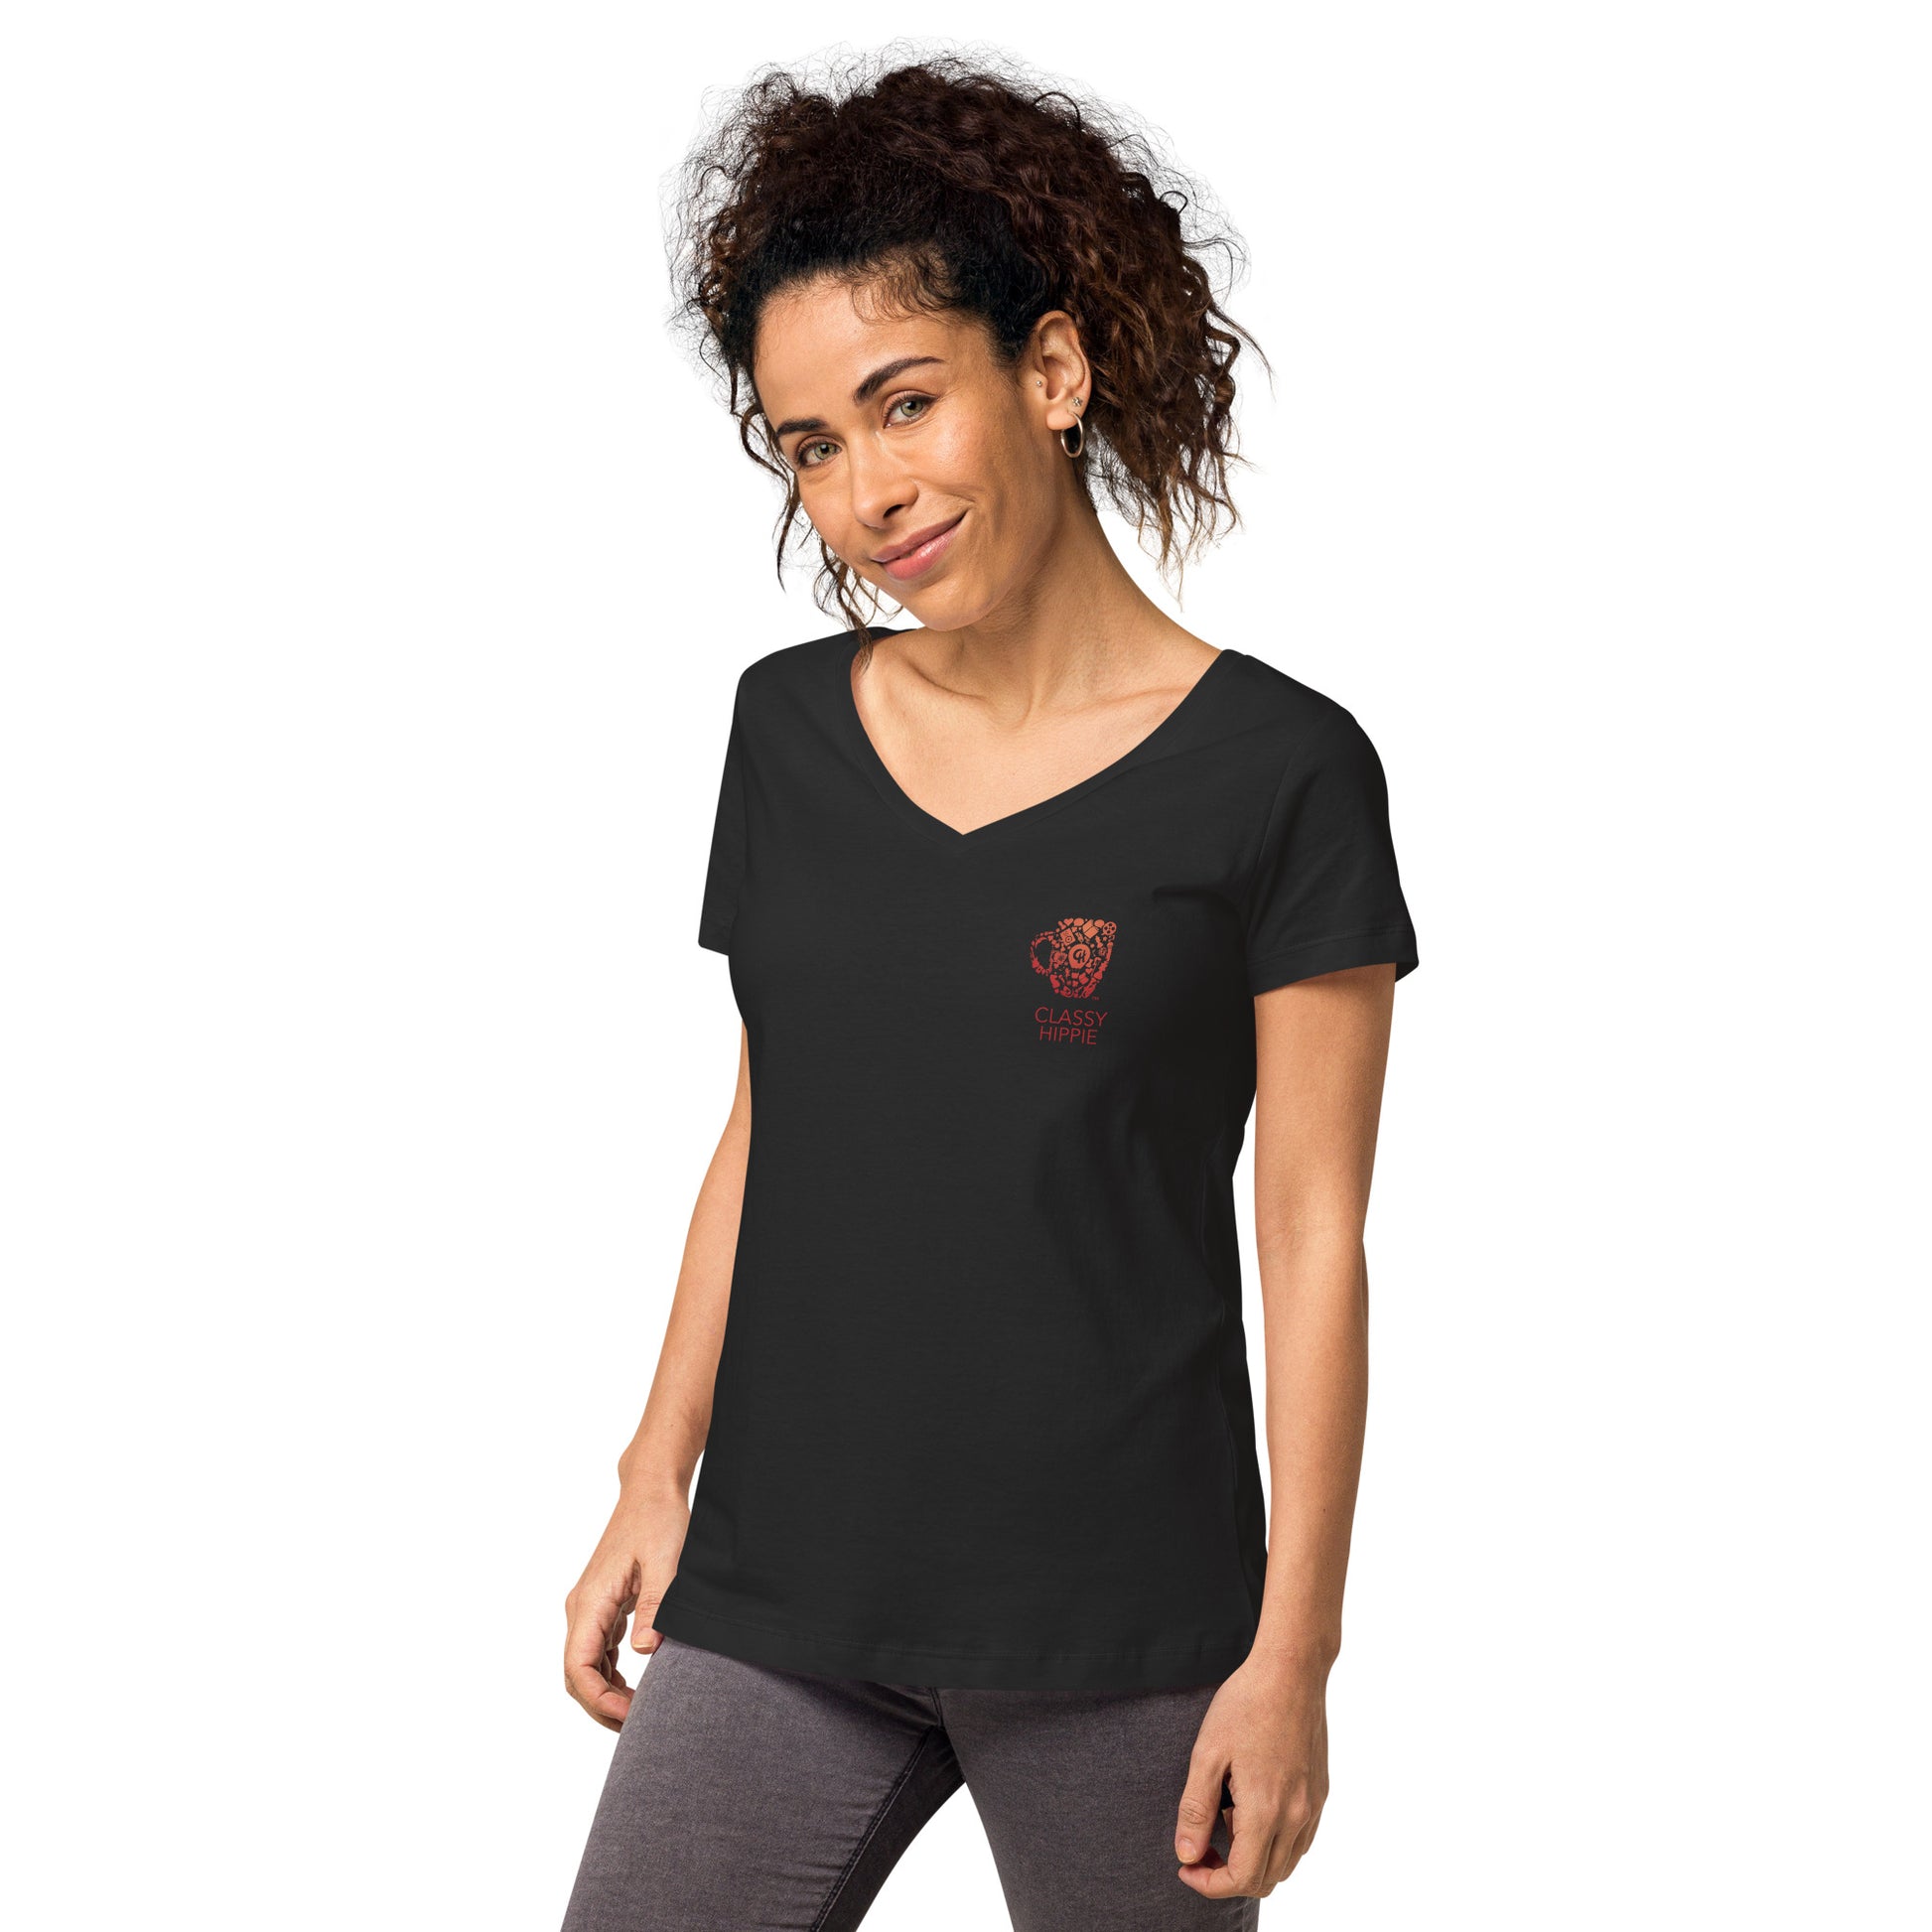 Classy Hippie Women’s fitted v-neck t-shirt